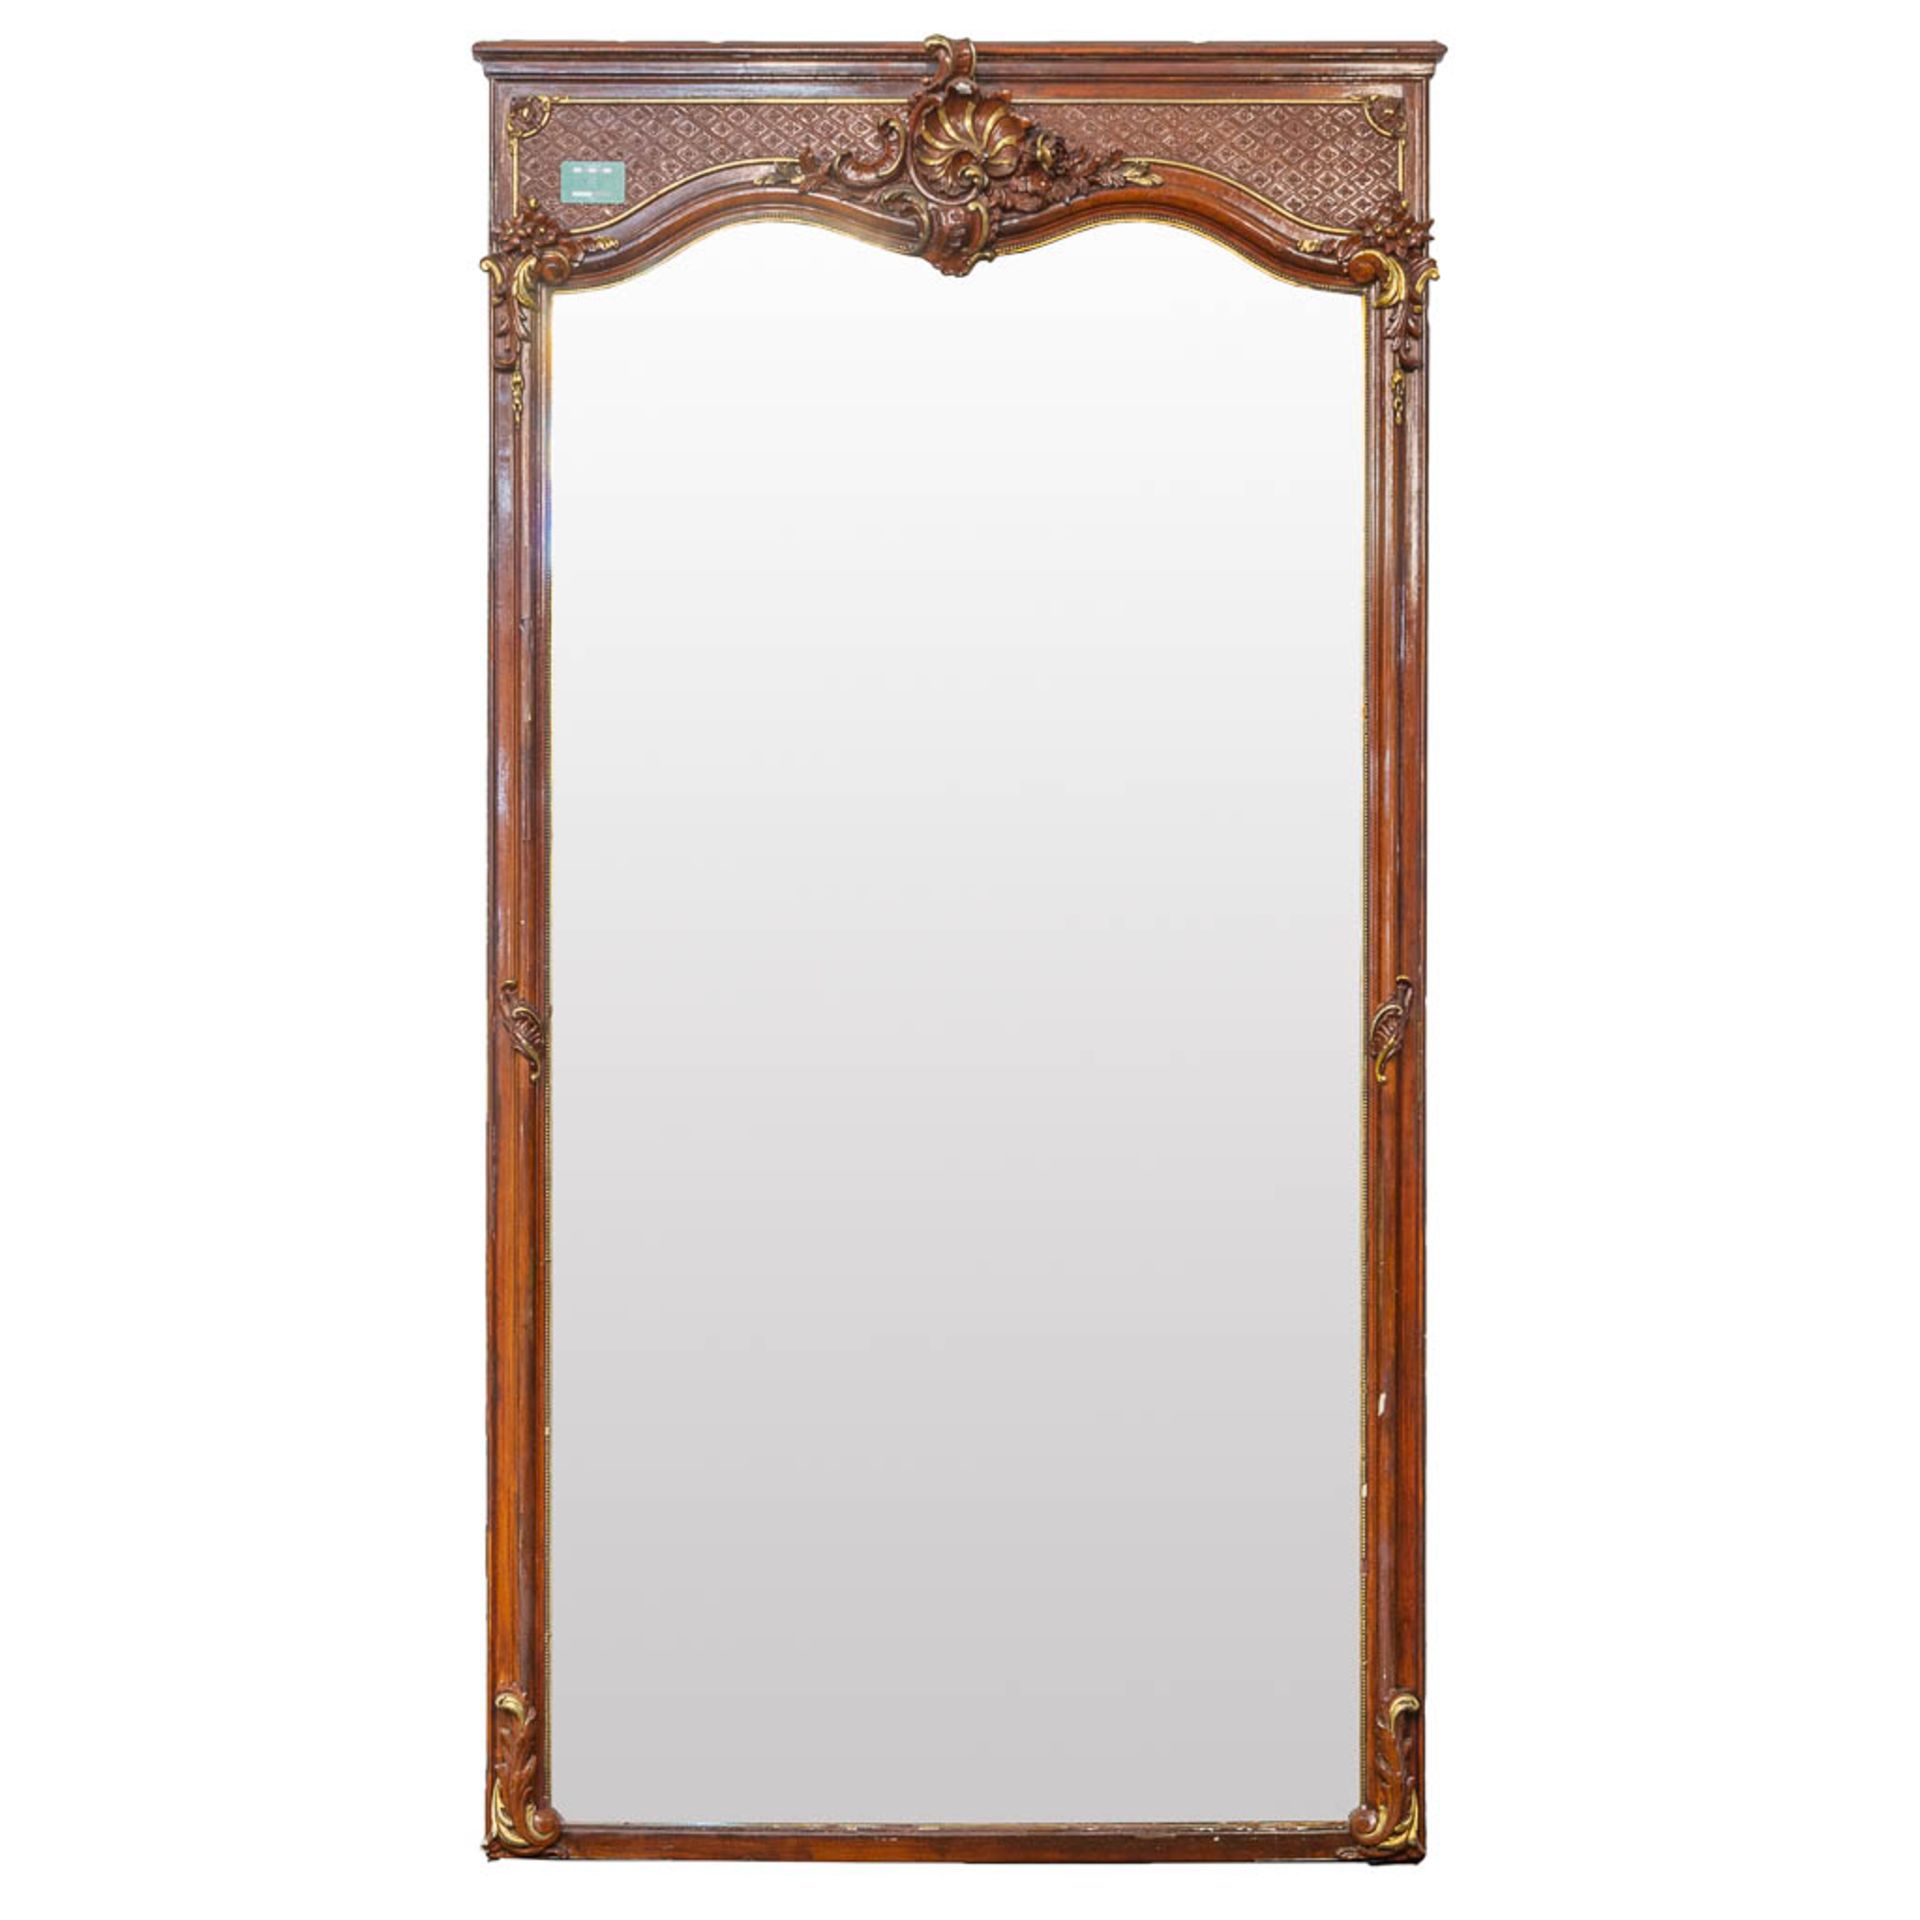 A large mirror made of sculptured wood and stucco in Louis XV style. (126 x 8 x 243 cm) - Image 2 of 8